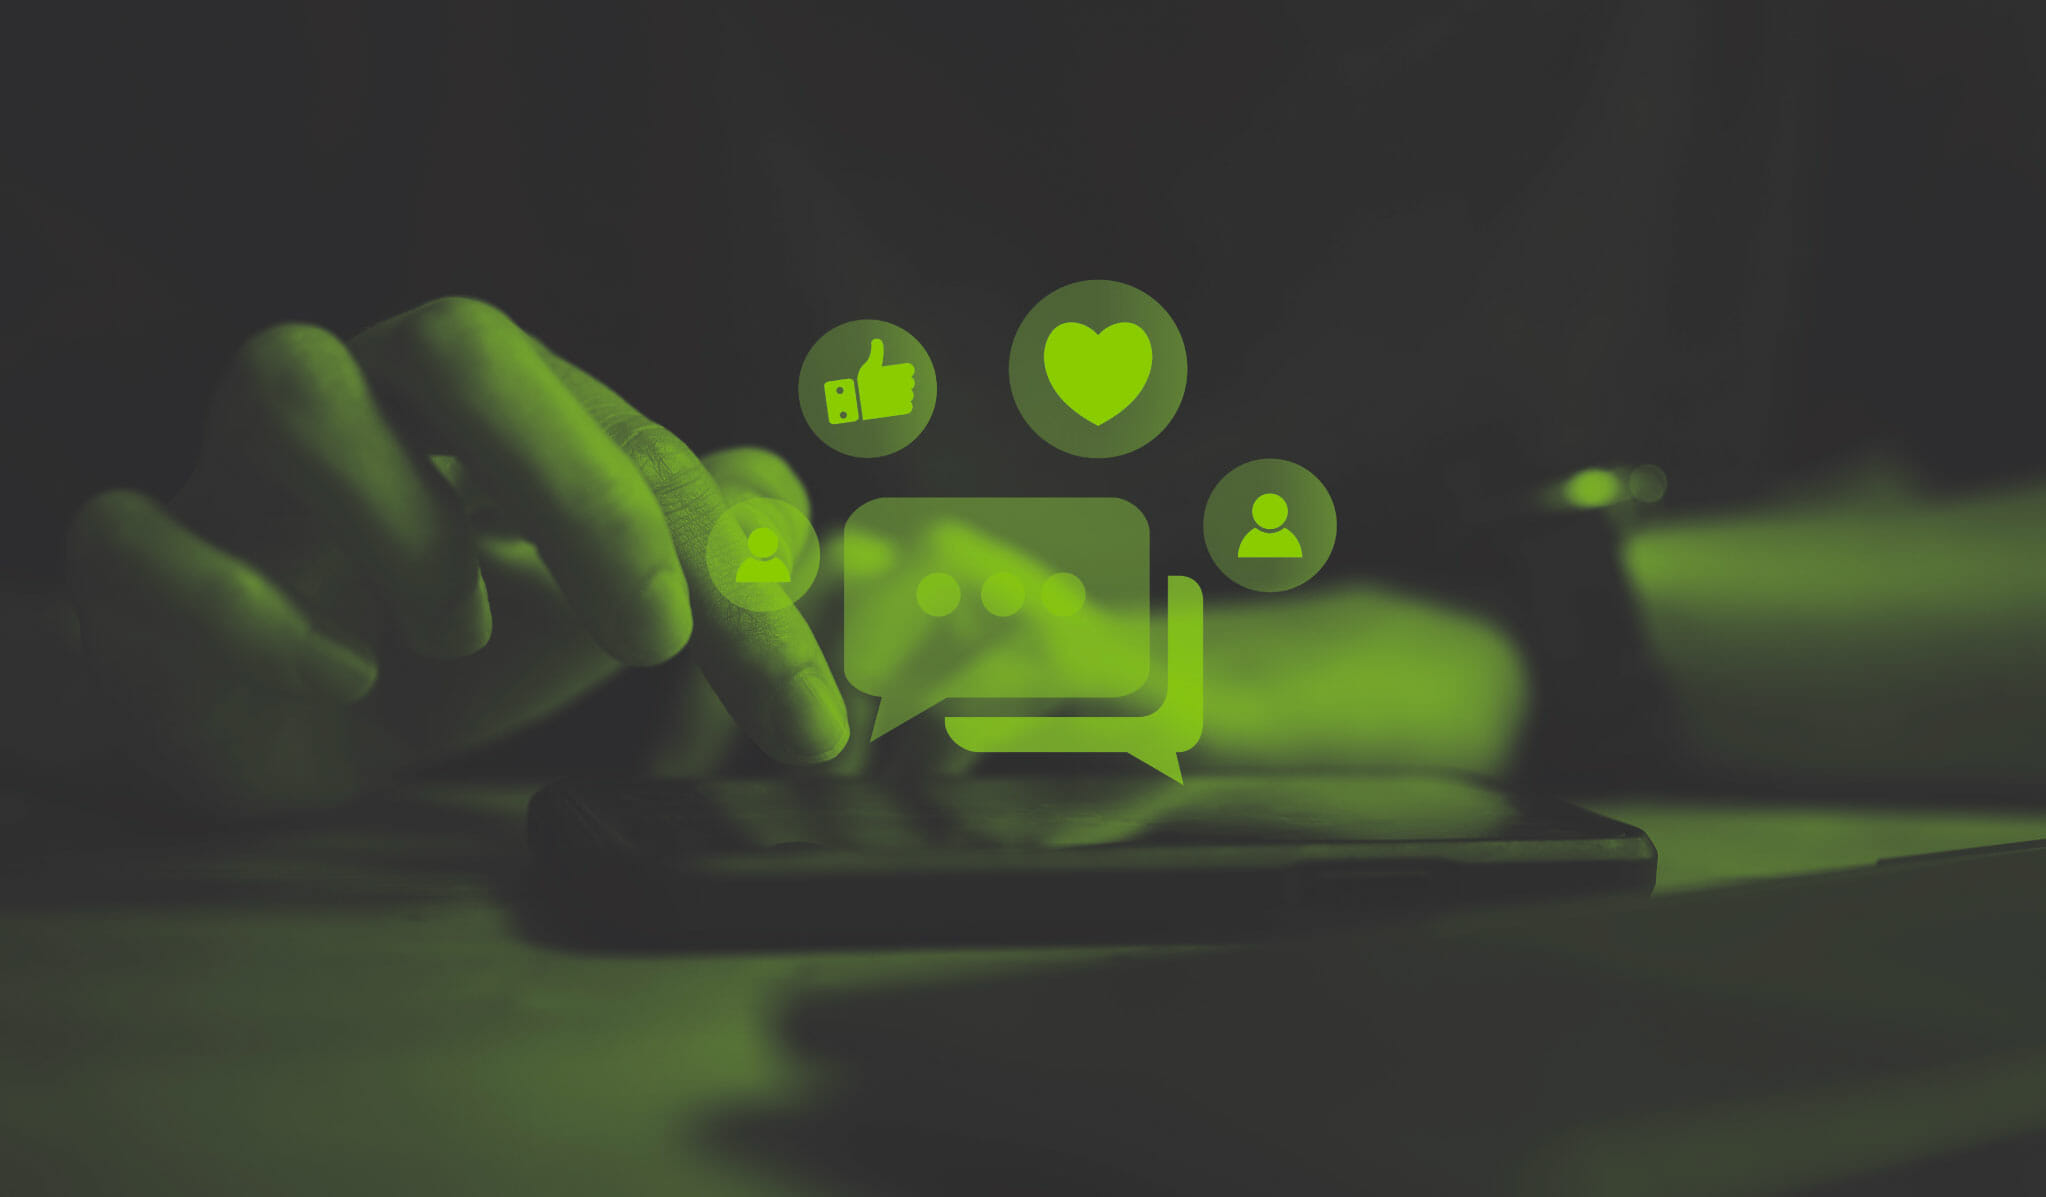 green and black image of a man's hands tapping on a phone on the table and social media icons flying above it